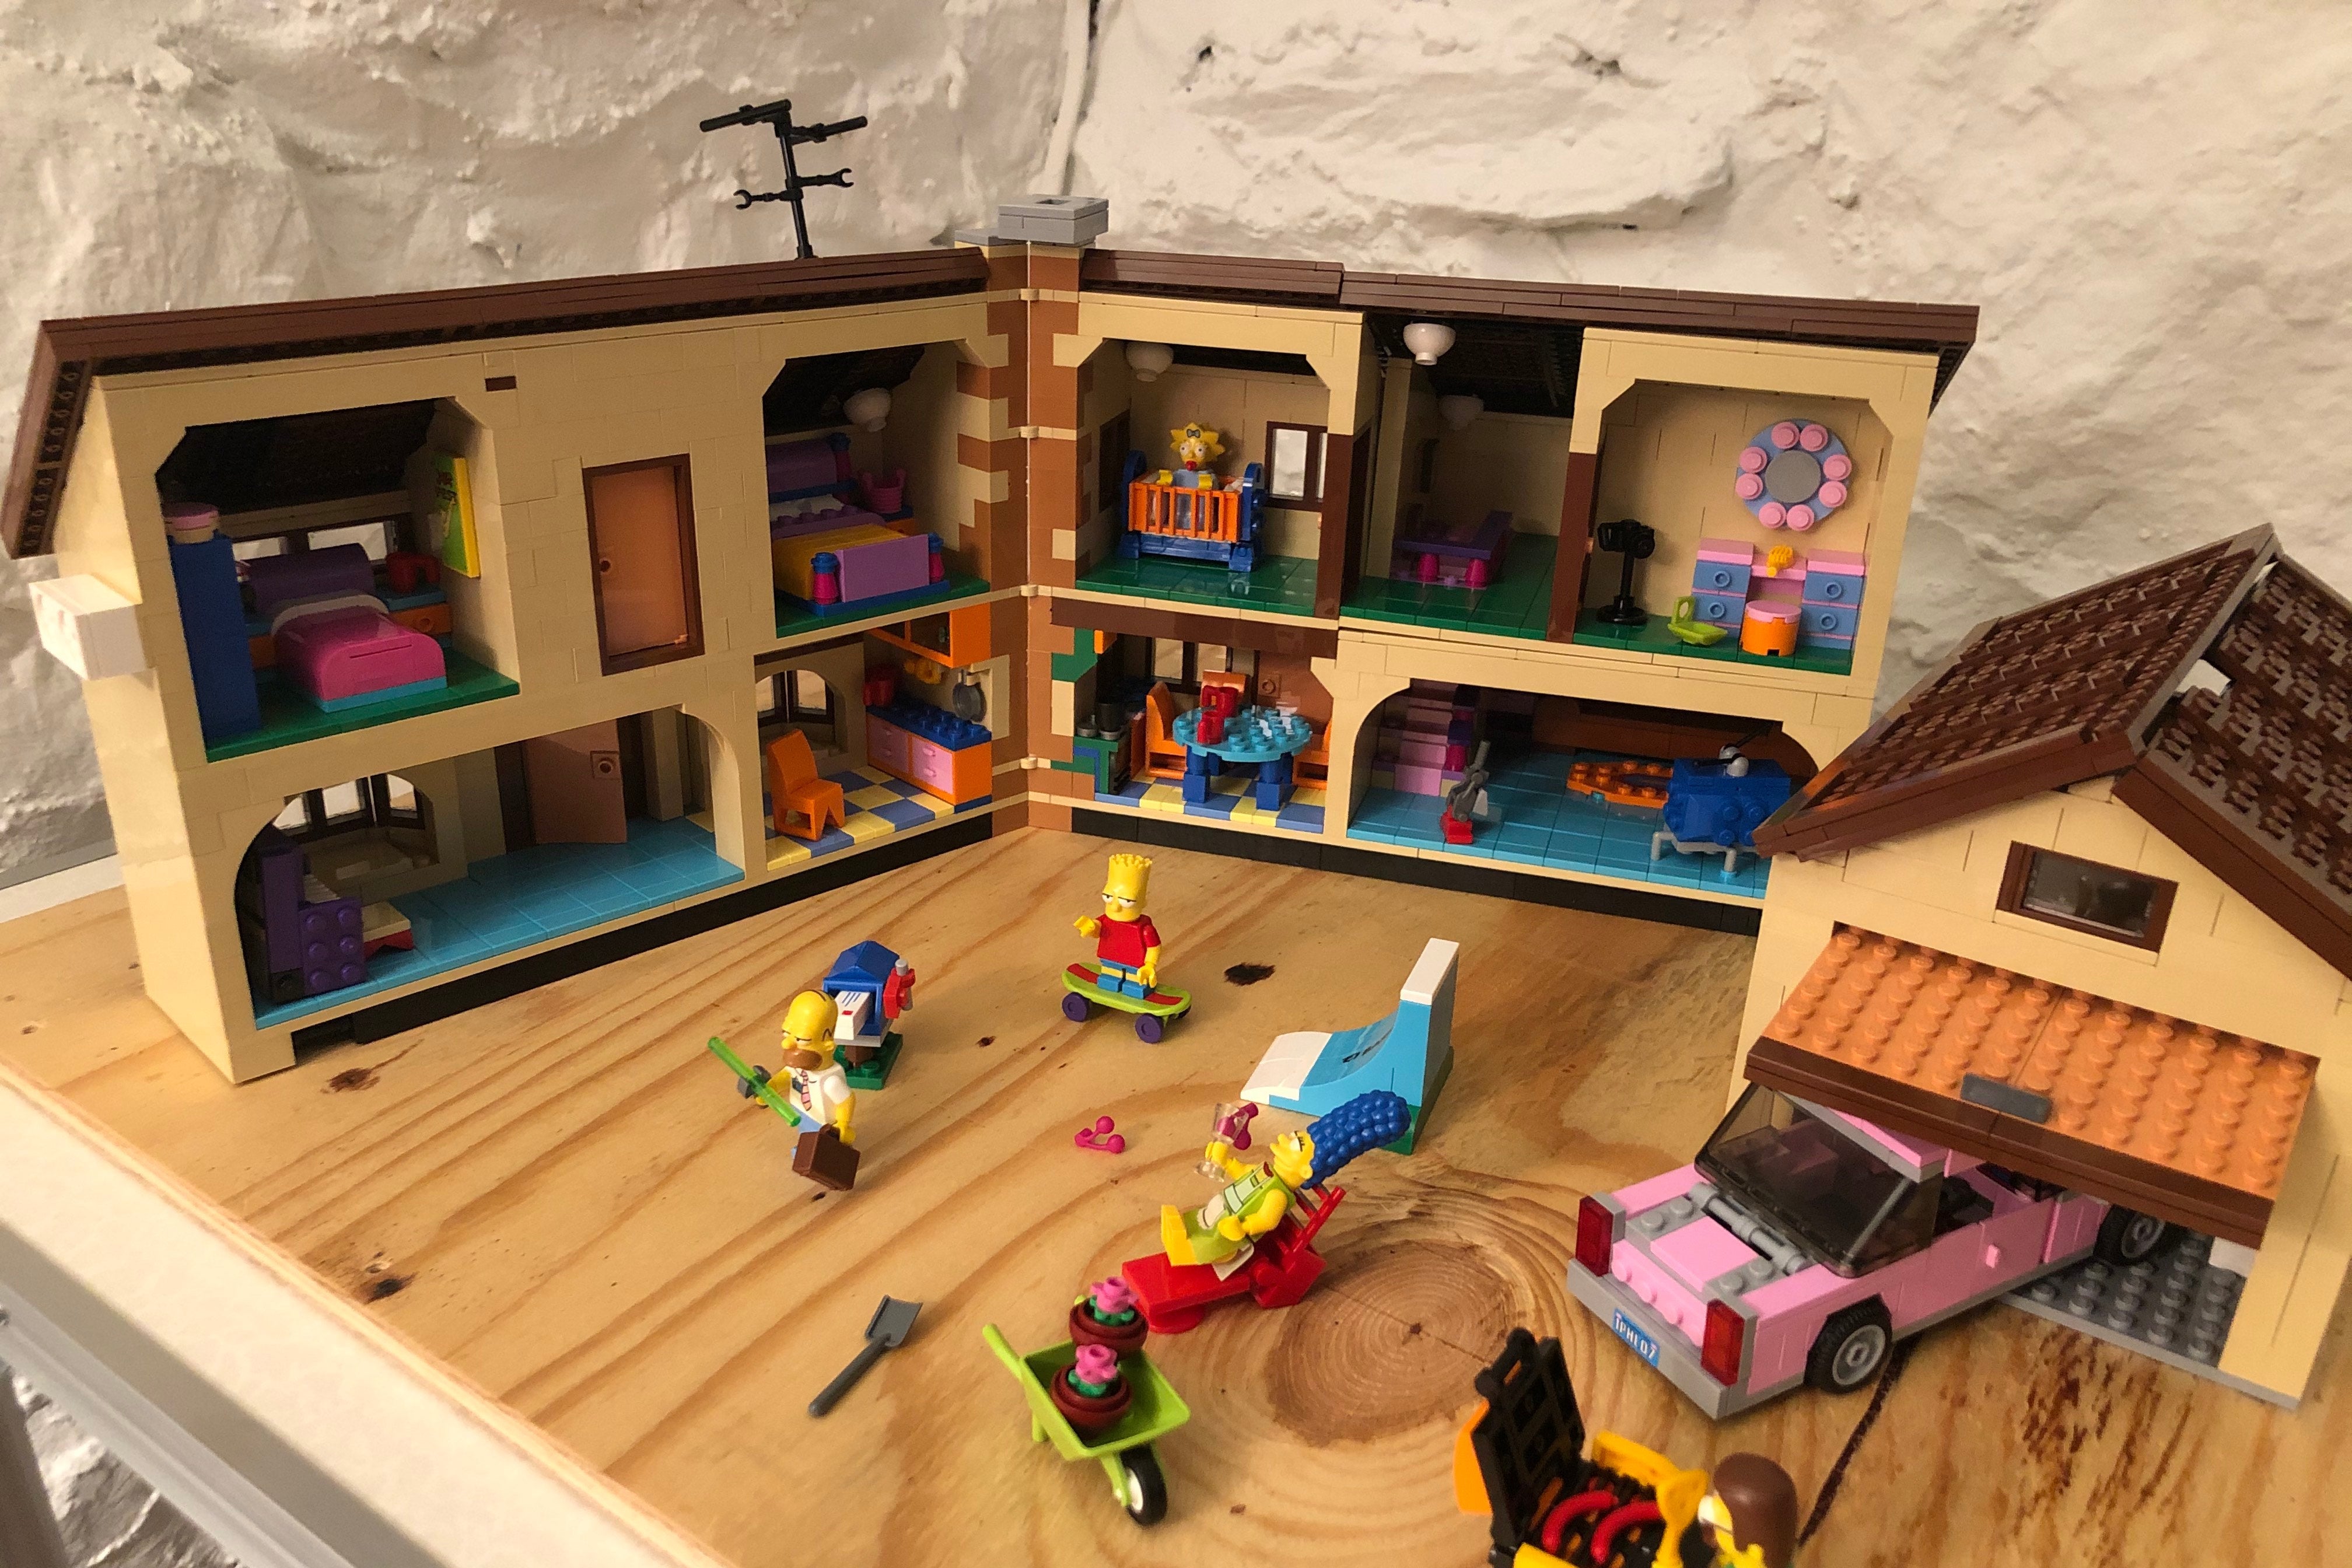 A photo of 742 Evergreen Terrace, in cross-section, showing such details as everyone's bedrooms, the iconic orange couch, and Ned Flanders